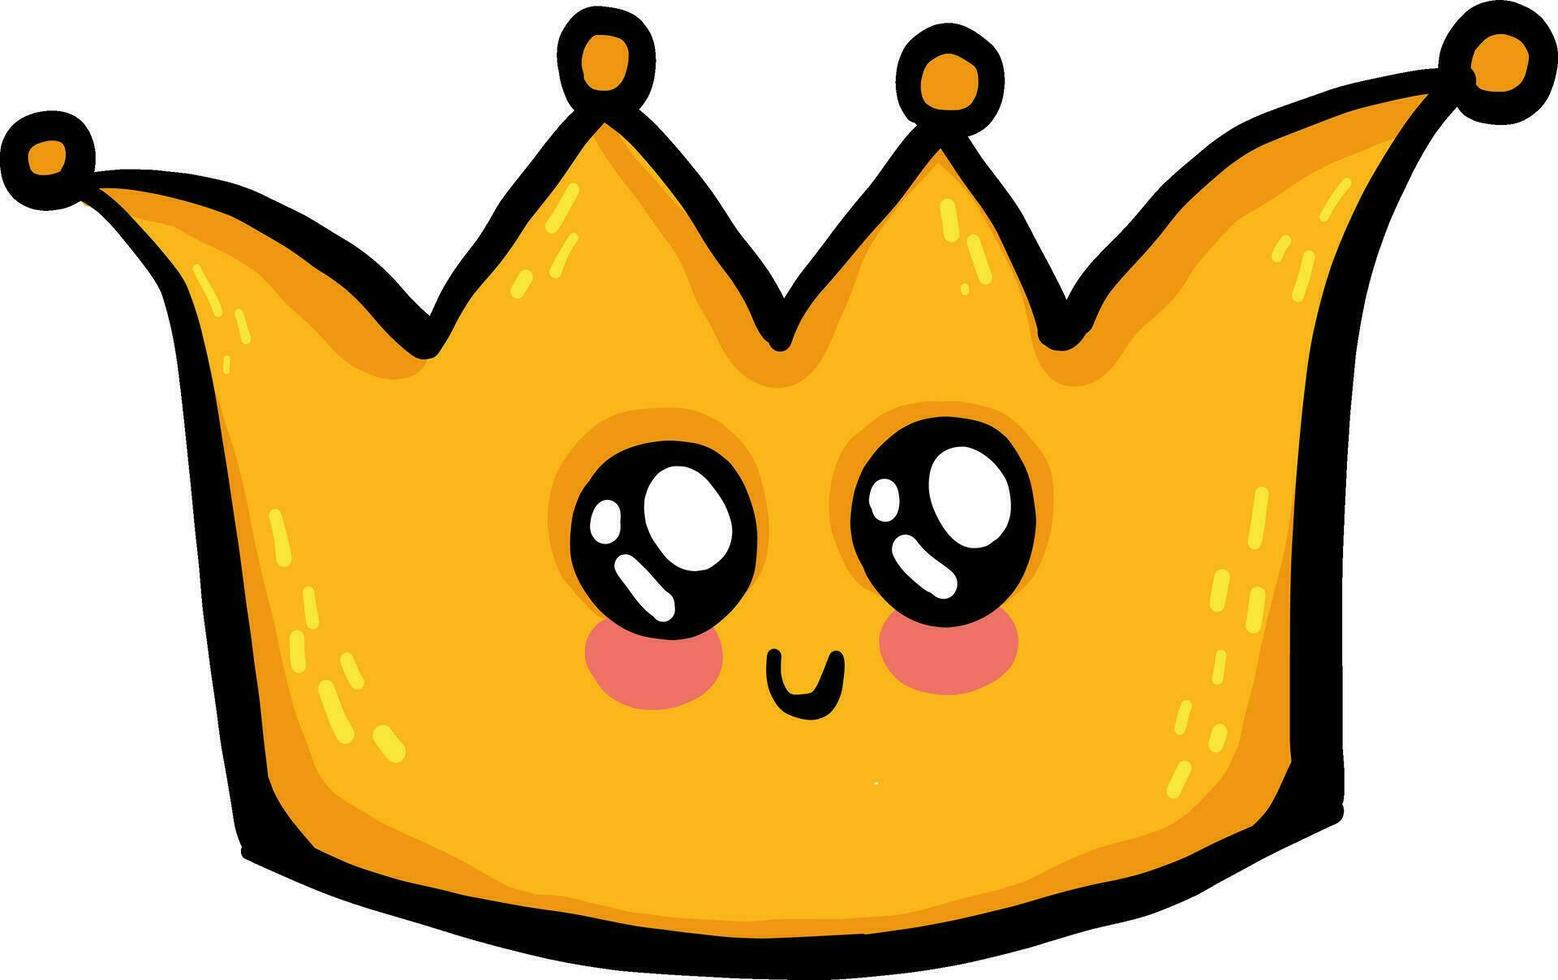 Cute crown with a face, illustration, vector on white background